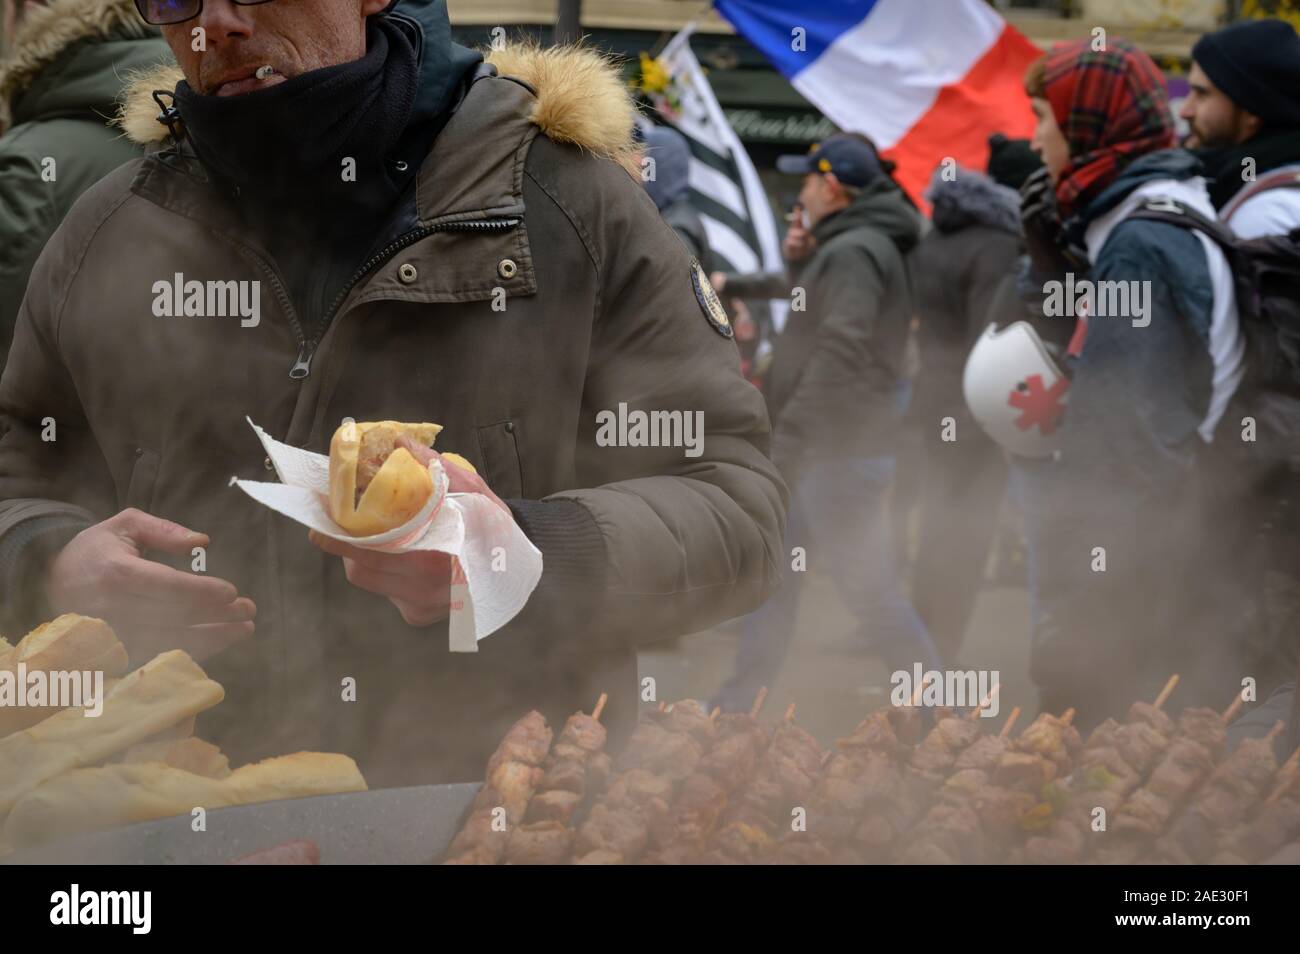 PARIS, FRANCE, DECEMBER 05 2019 : a protestor having some food at a street vendor during a 'Gilets Jaunes' (Yellow Vests) protest. Stock Photo